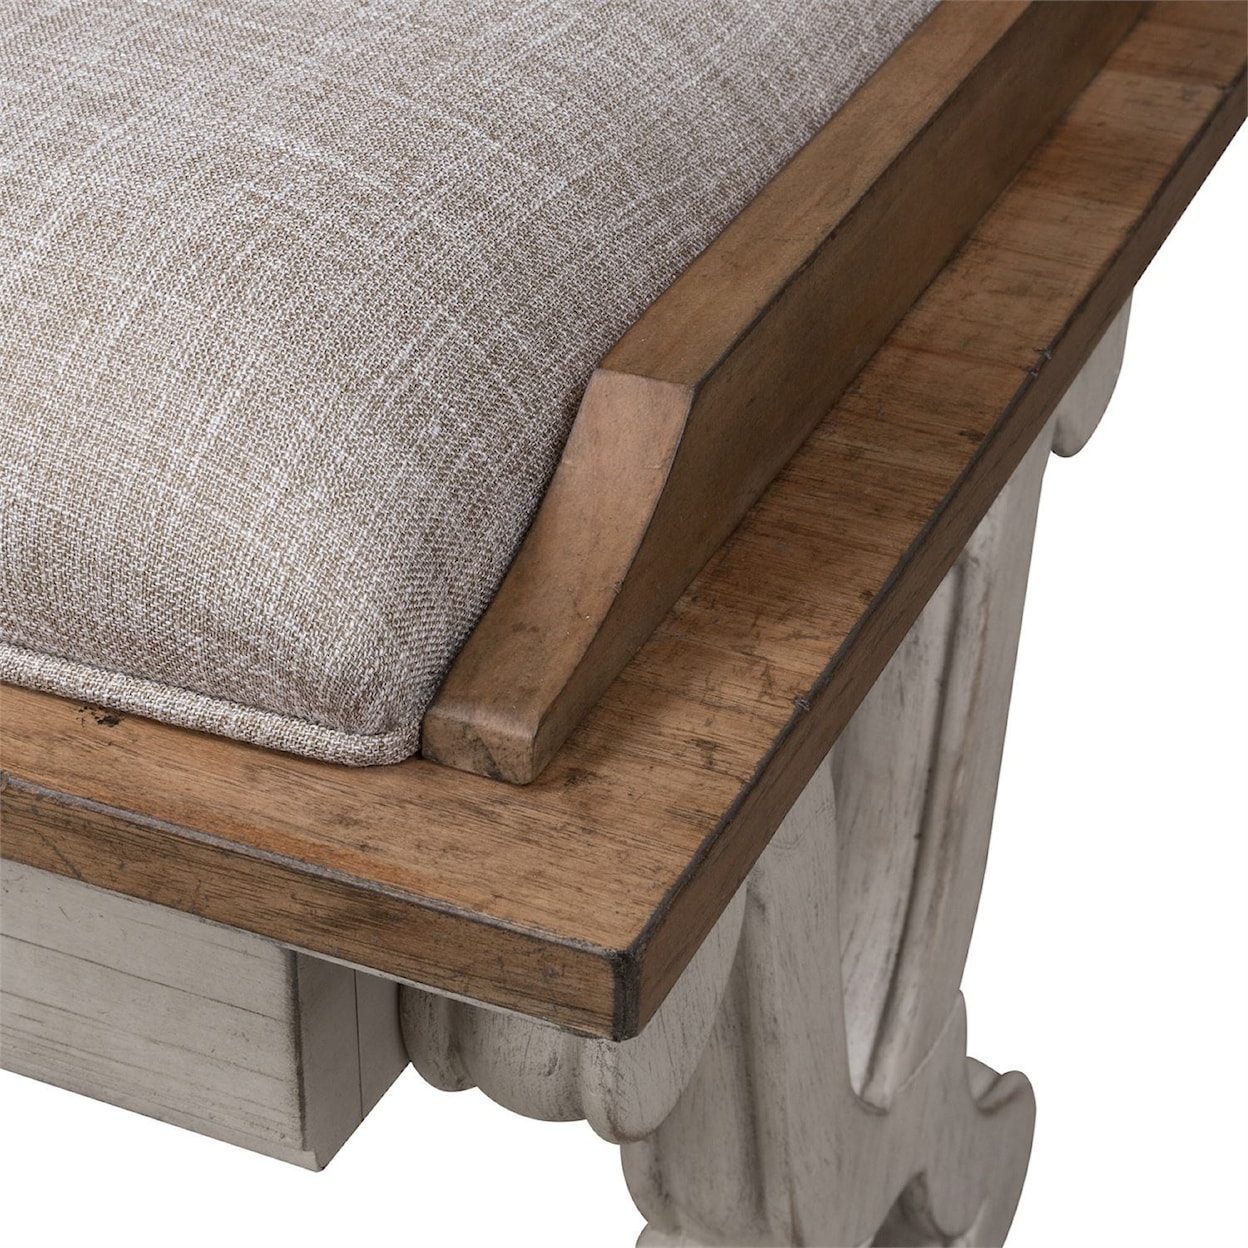 Libby Farmhouse Reimagined Bed Bench